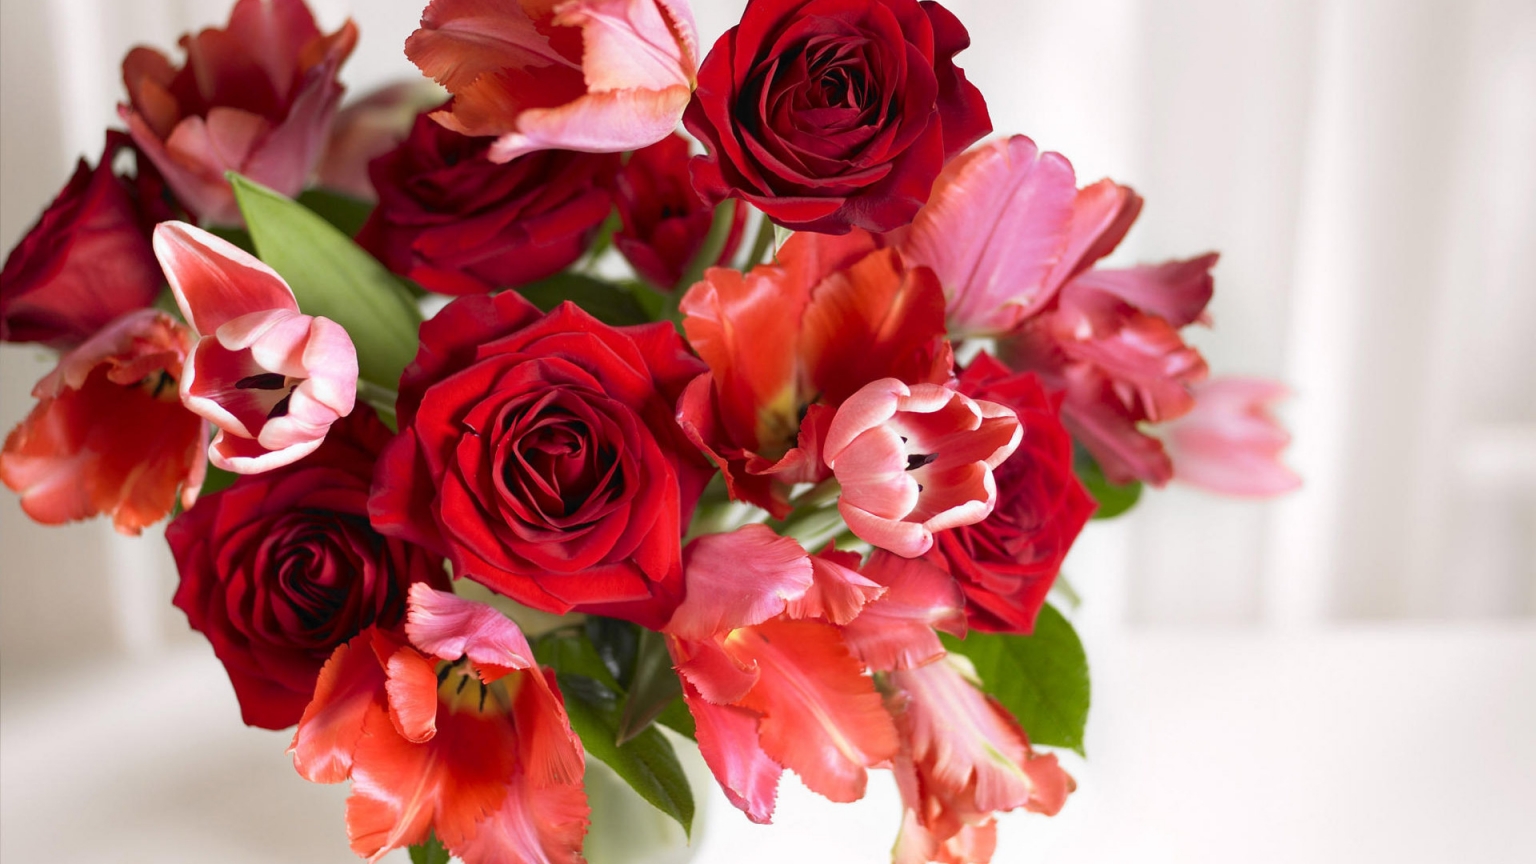 Arrangement of Roses and Tulips for 1536 x 864 HDTV resolution